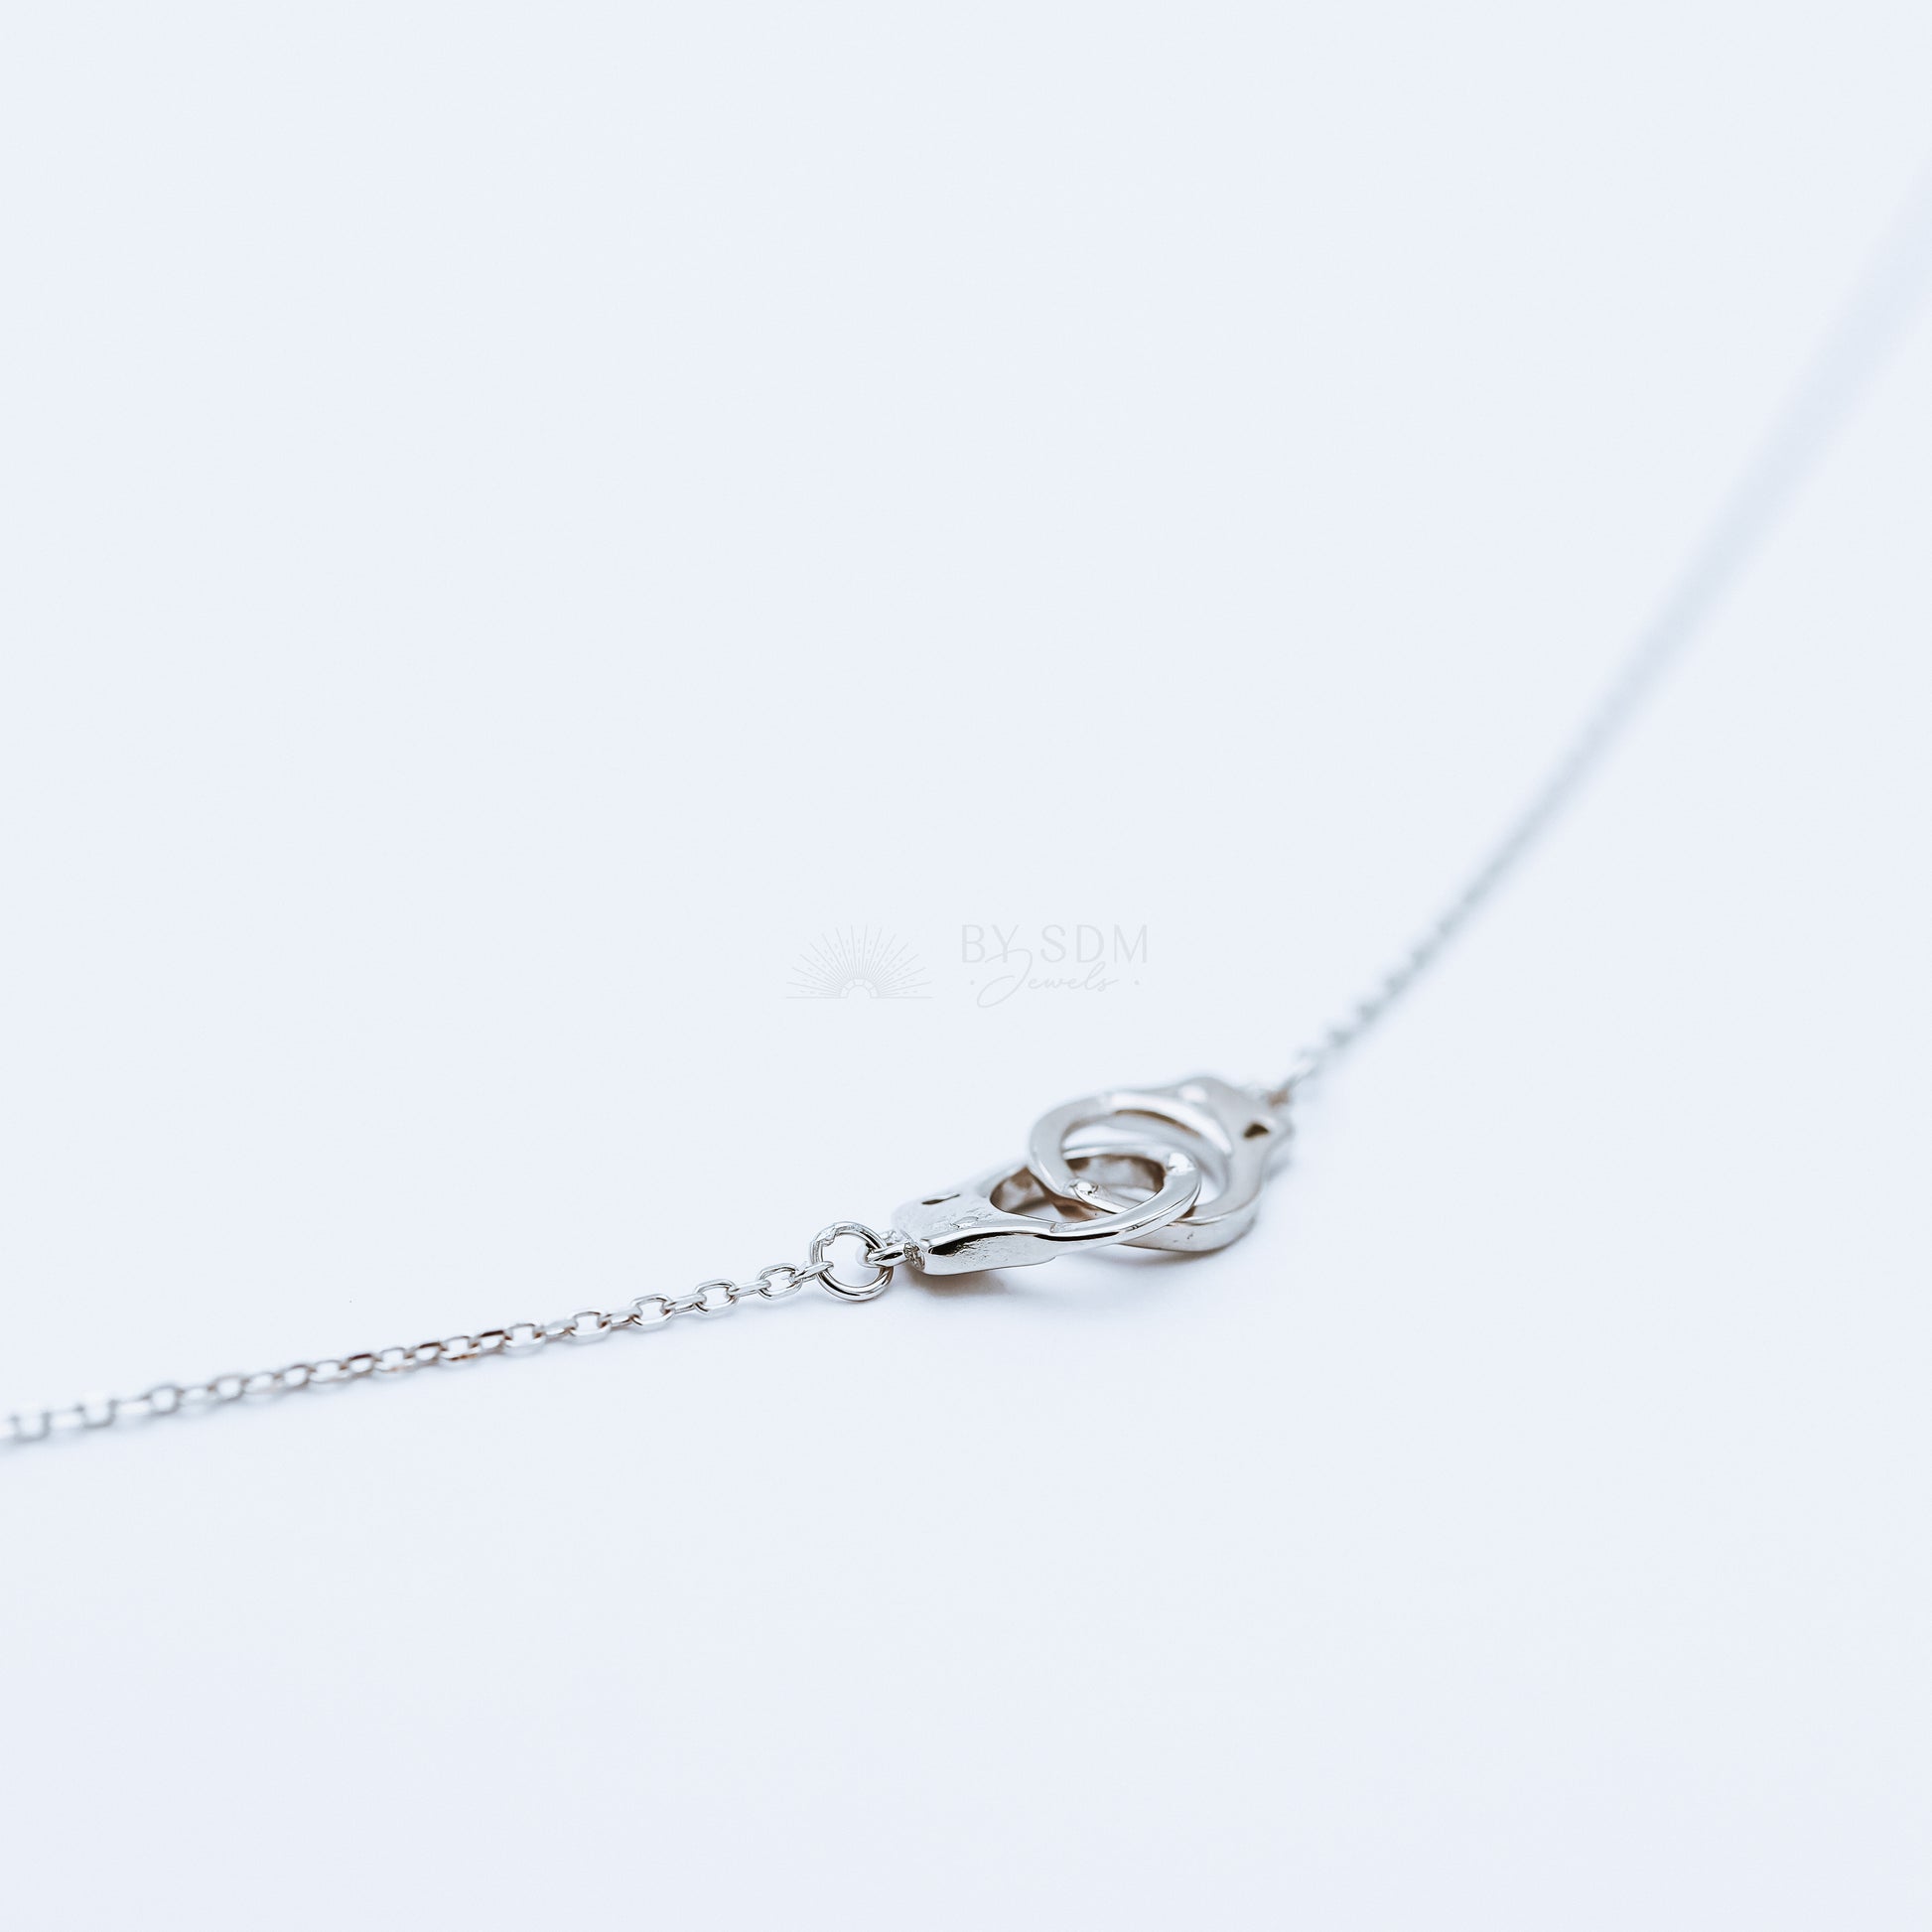 Freedom Handcuff Necklace • Dainty Eternity Necklace • Sterling Silver